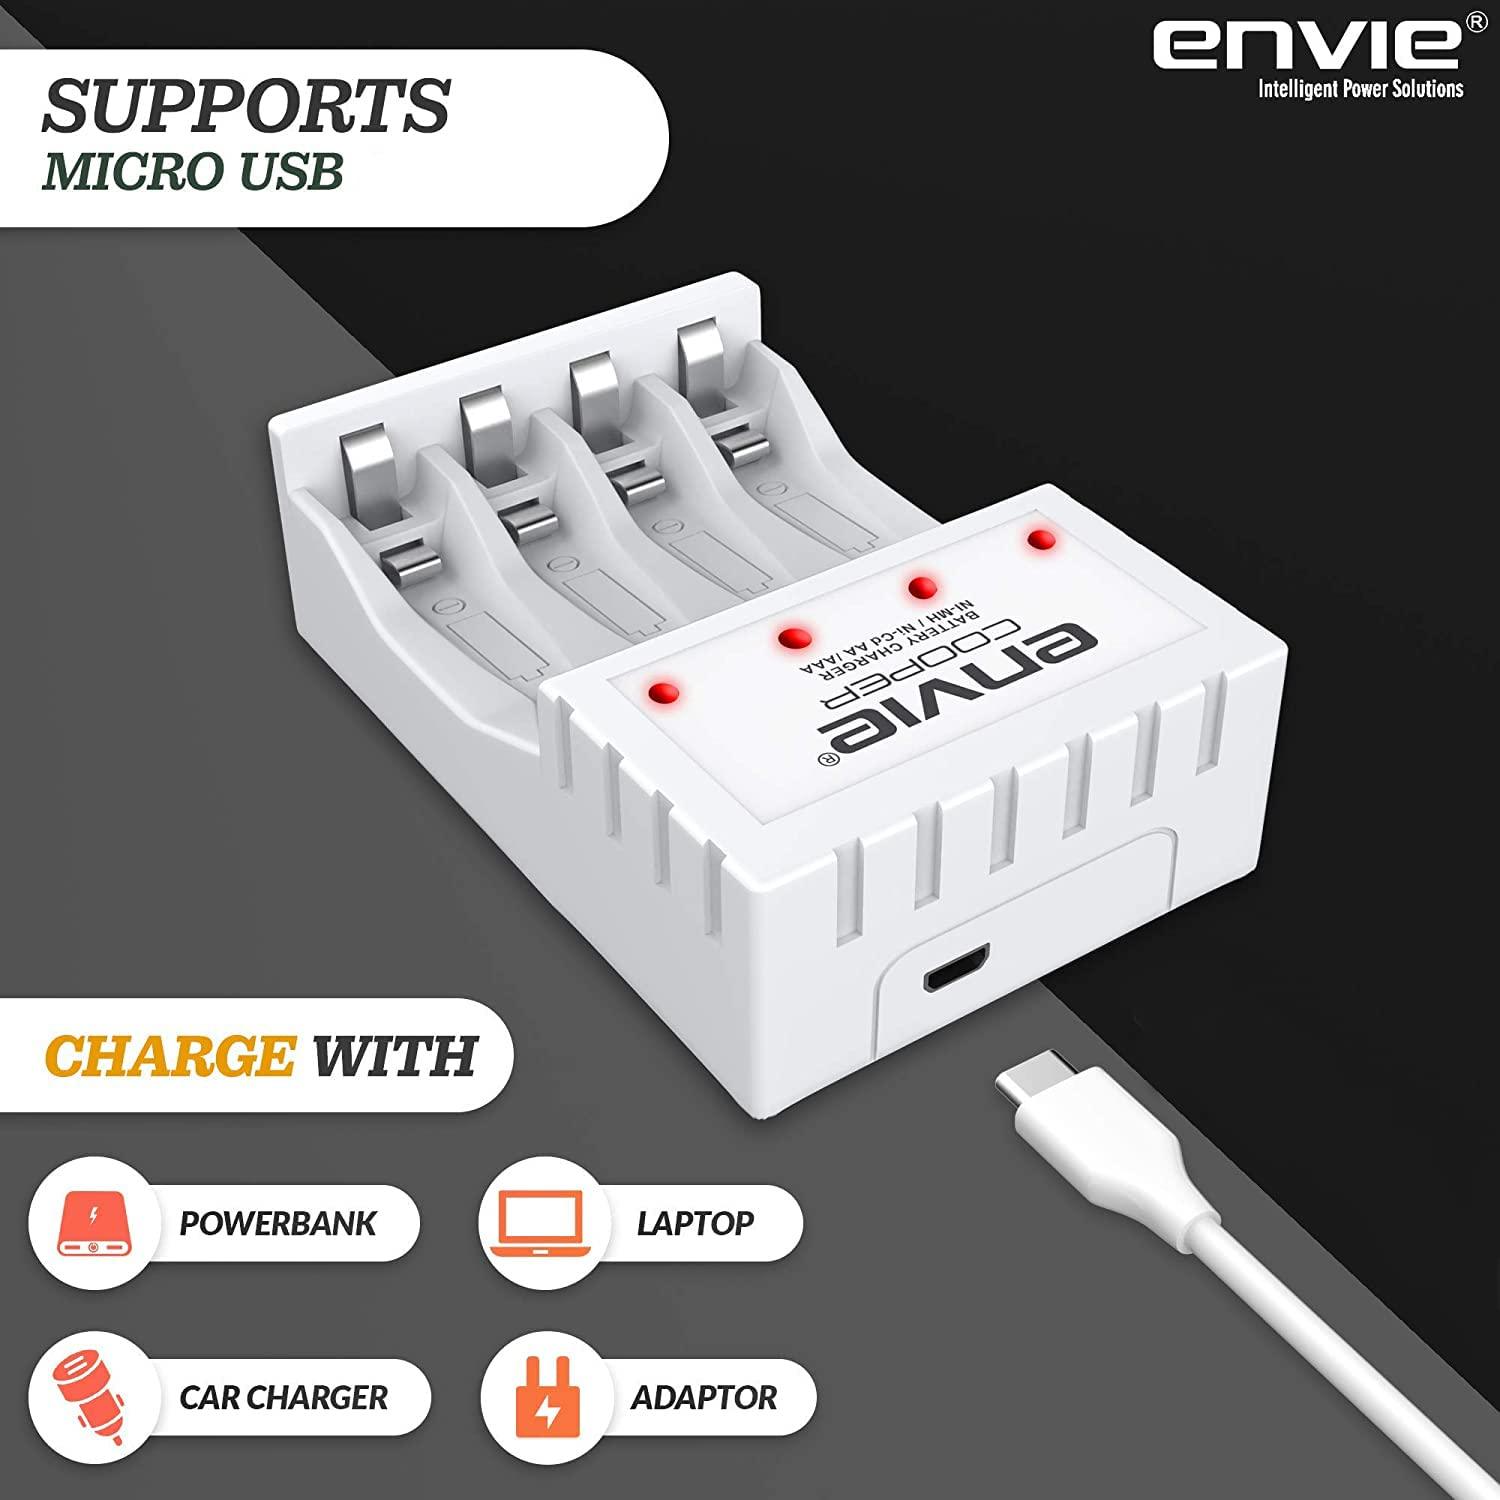 Buy ENVIE (ECR 20 MC+4xAAA1100) Standard Rechargeable Battery Charger for  Online Best Prices